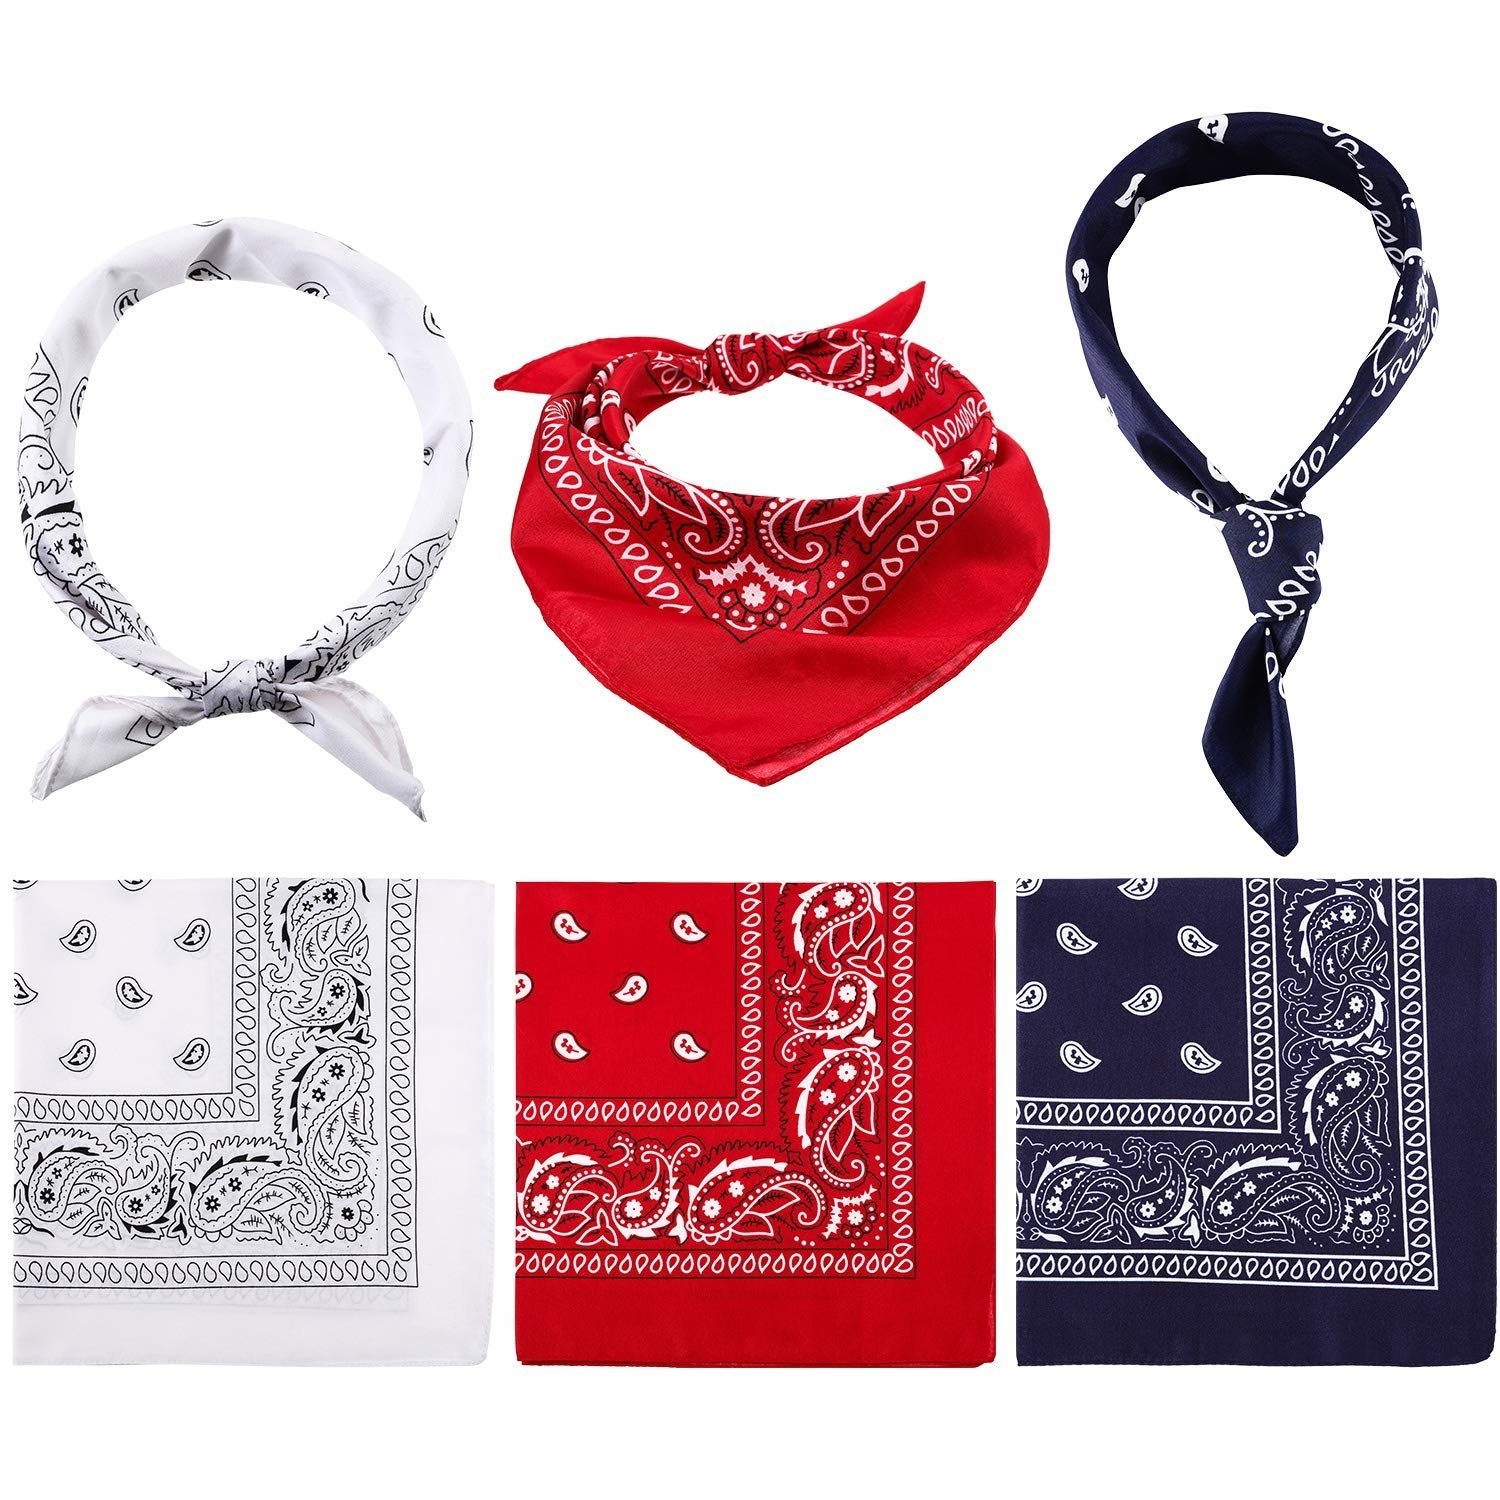 A set of three bandanas in the colours white, red and navy blue.